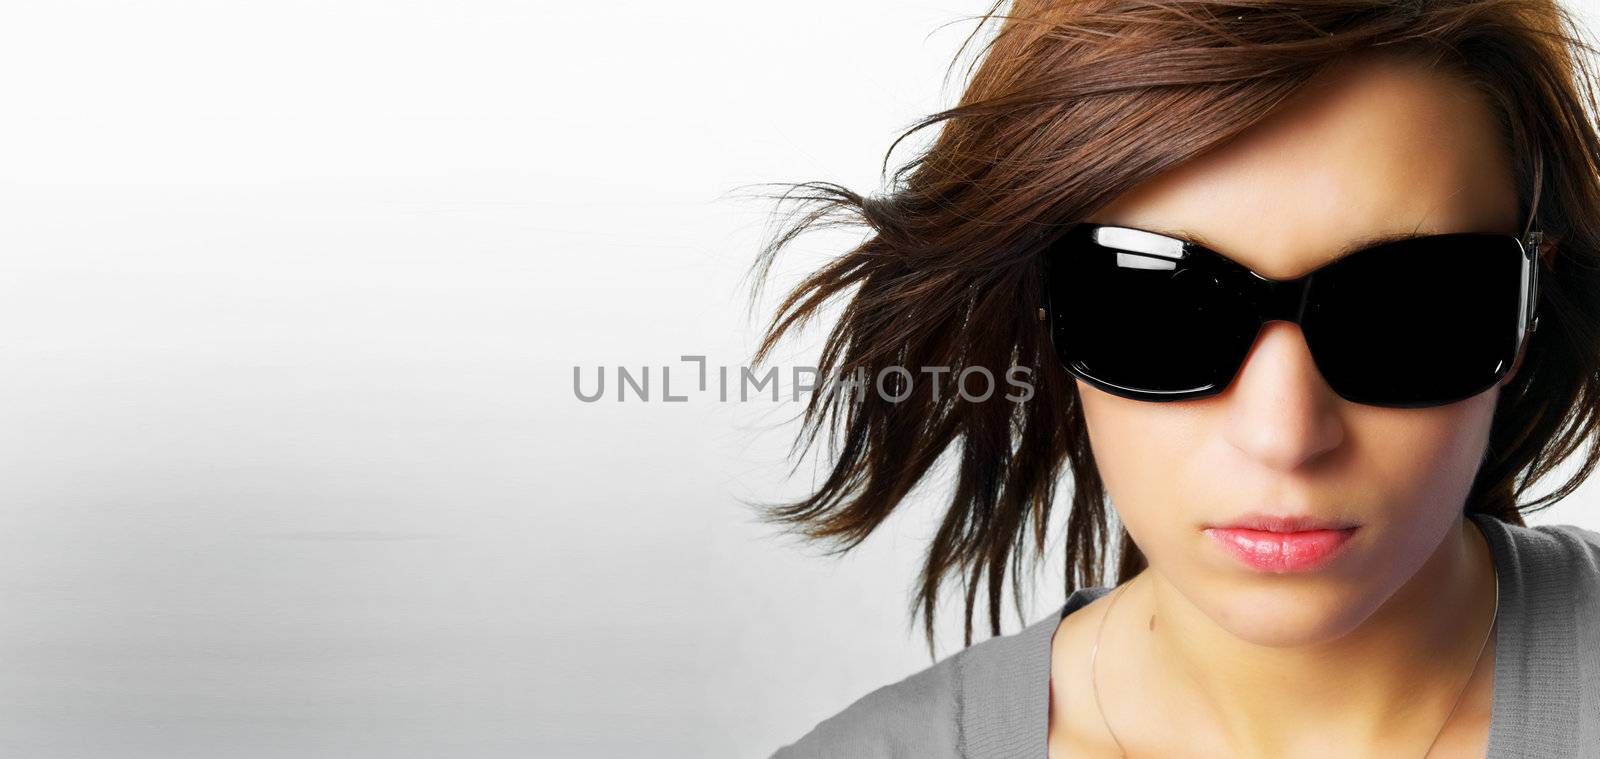 Modern, stylish portrait of a beautiful young woman with a lot of copyspace